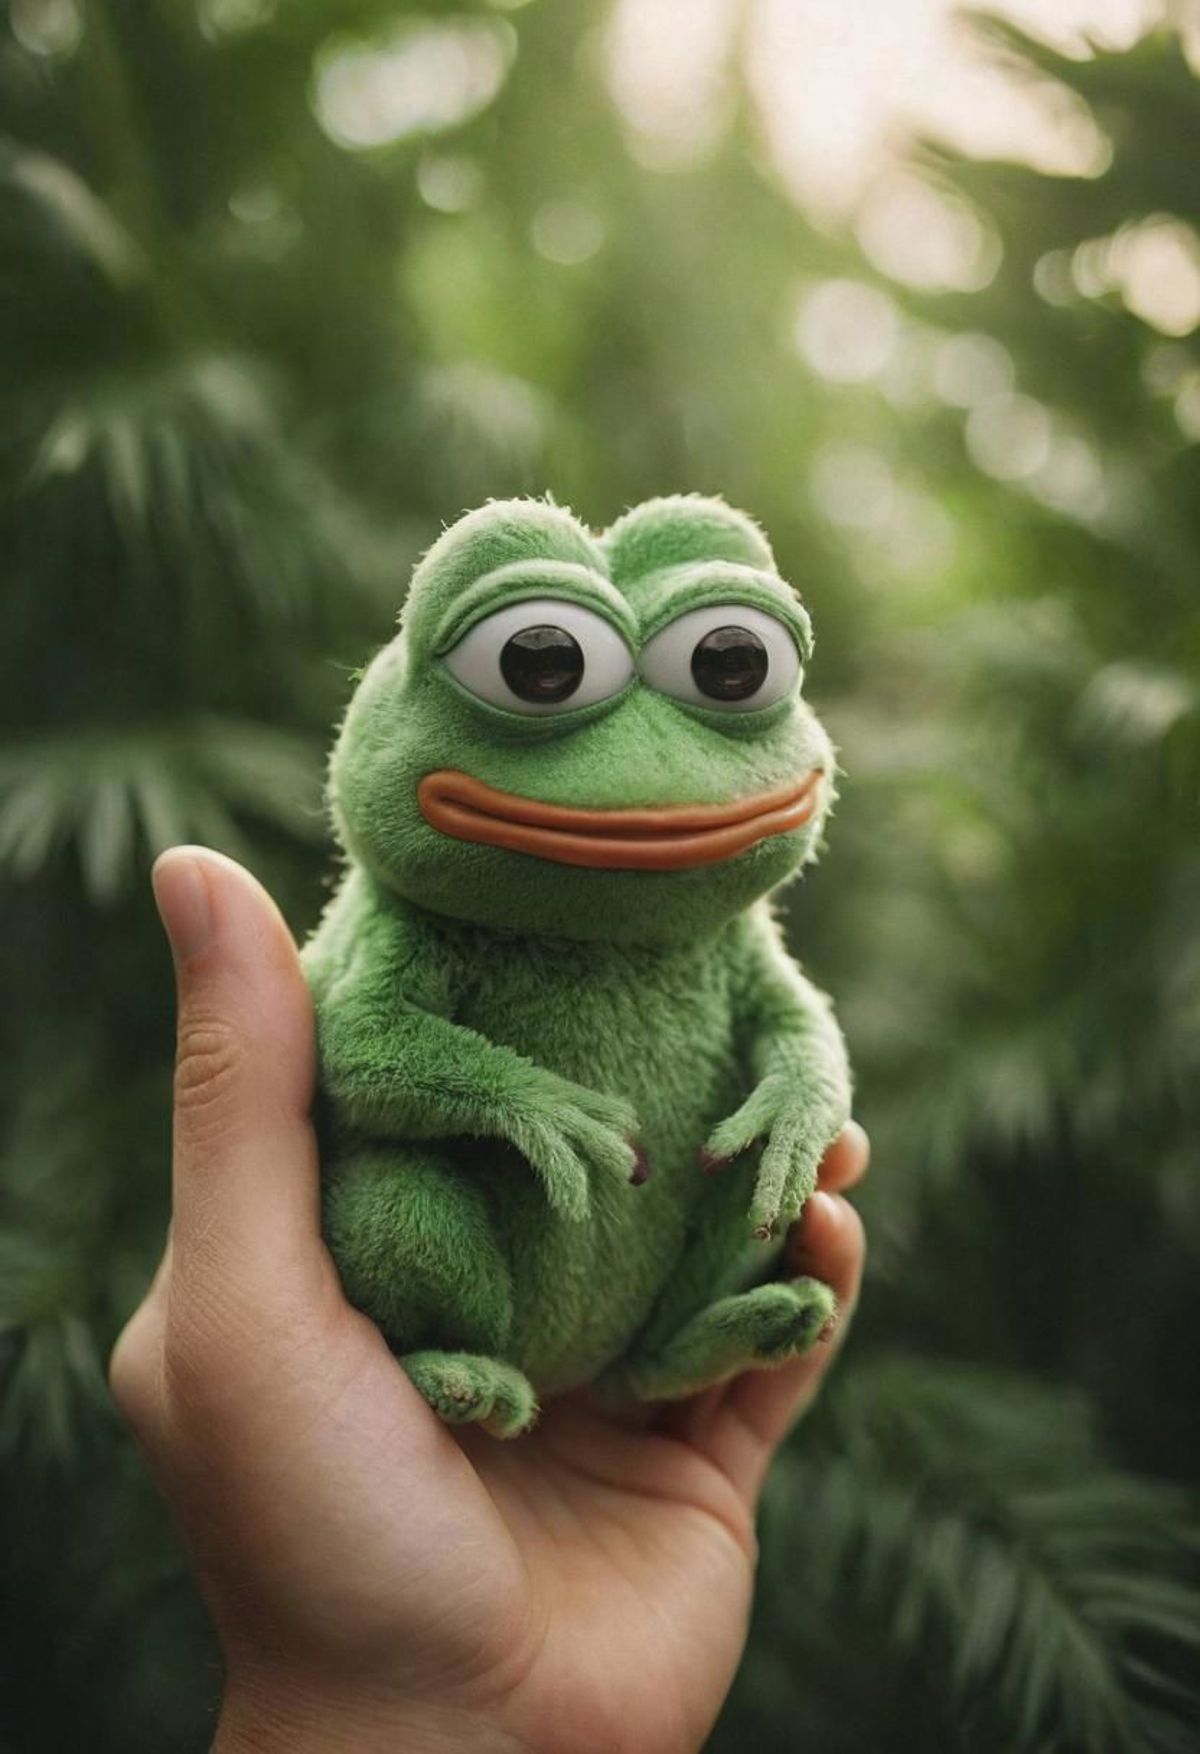 A small green frog with googly eyes sitting in a person's hand.